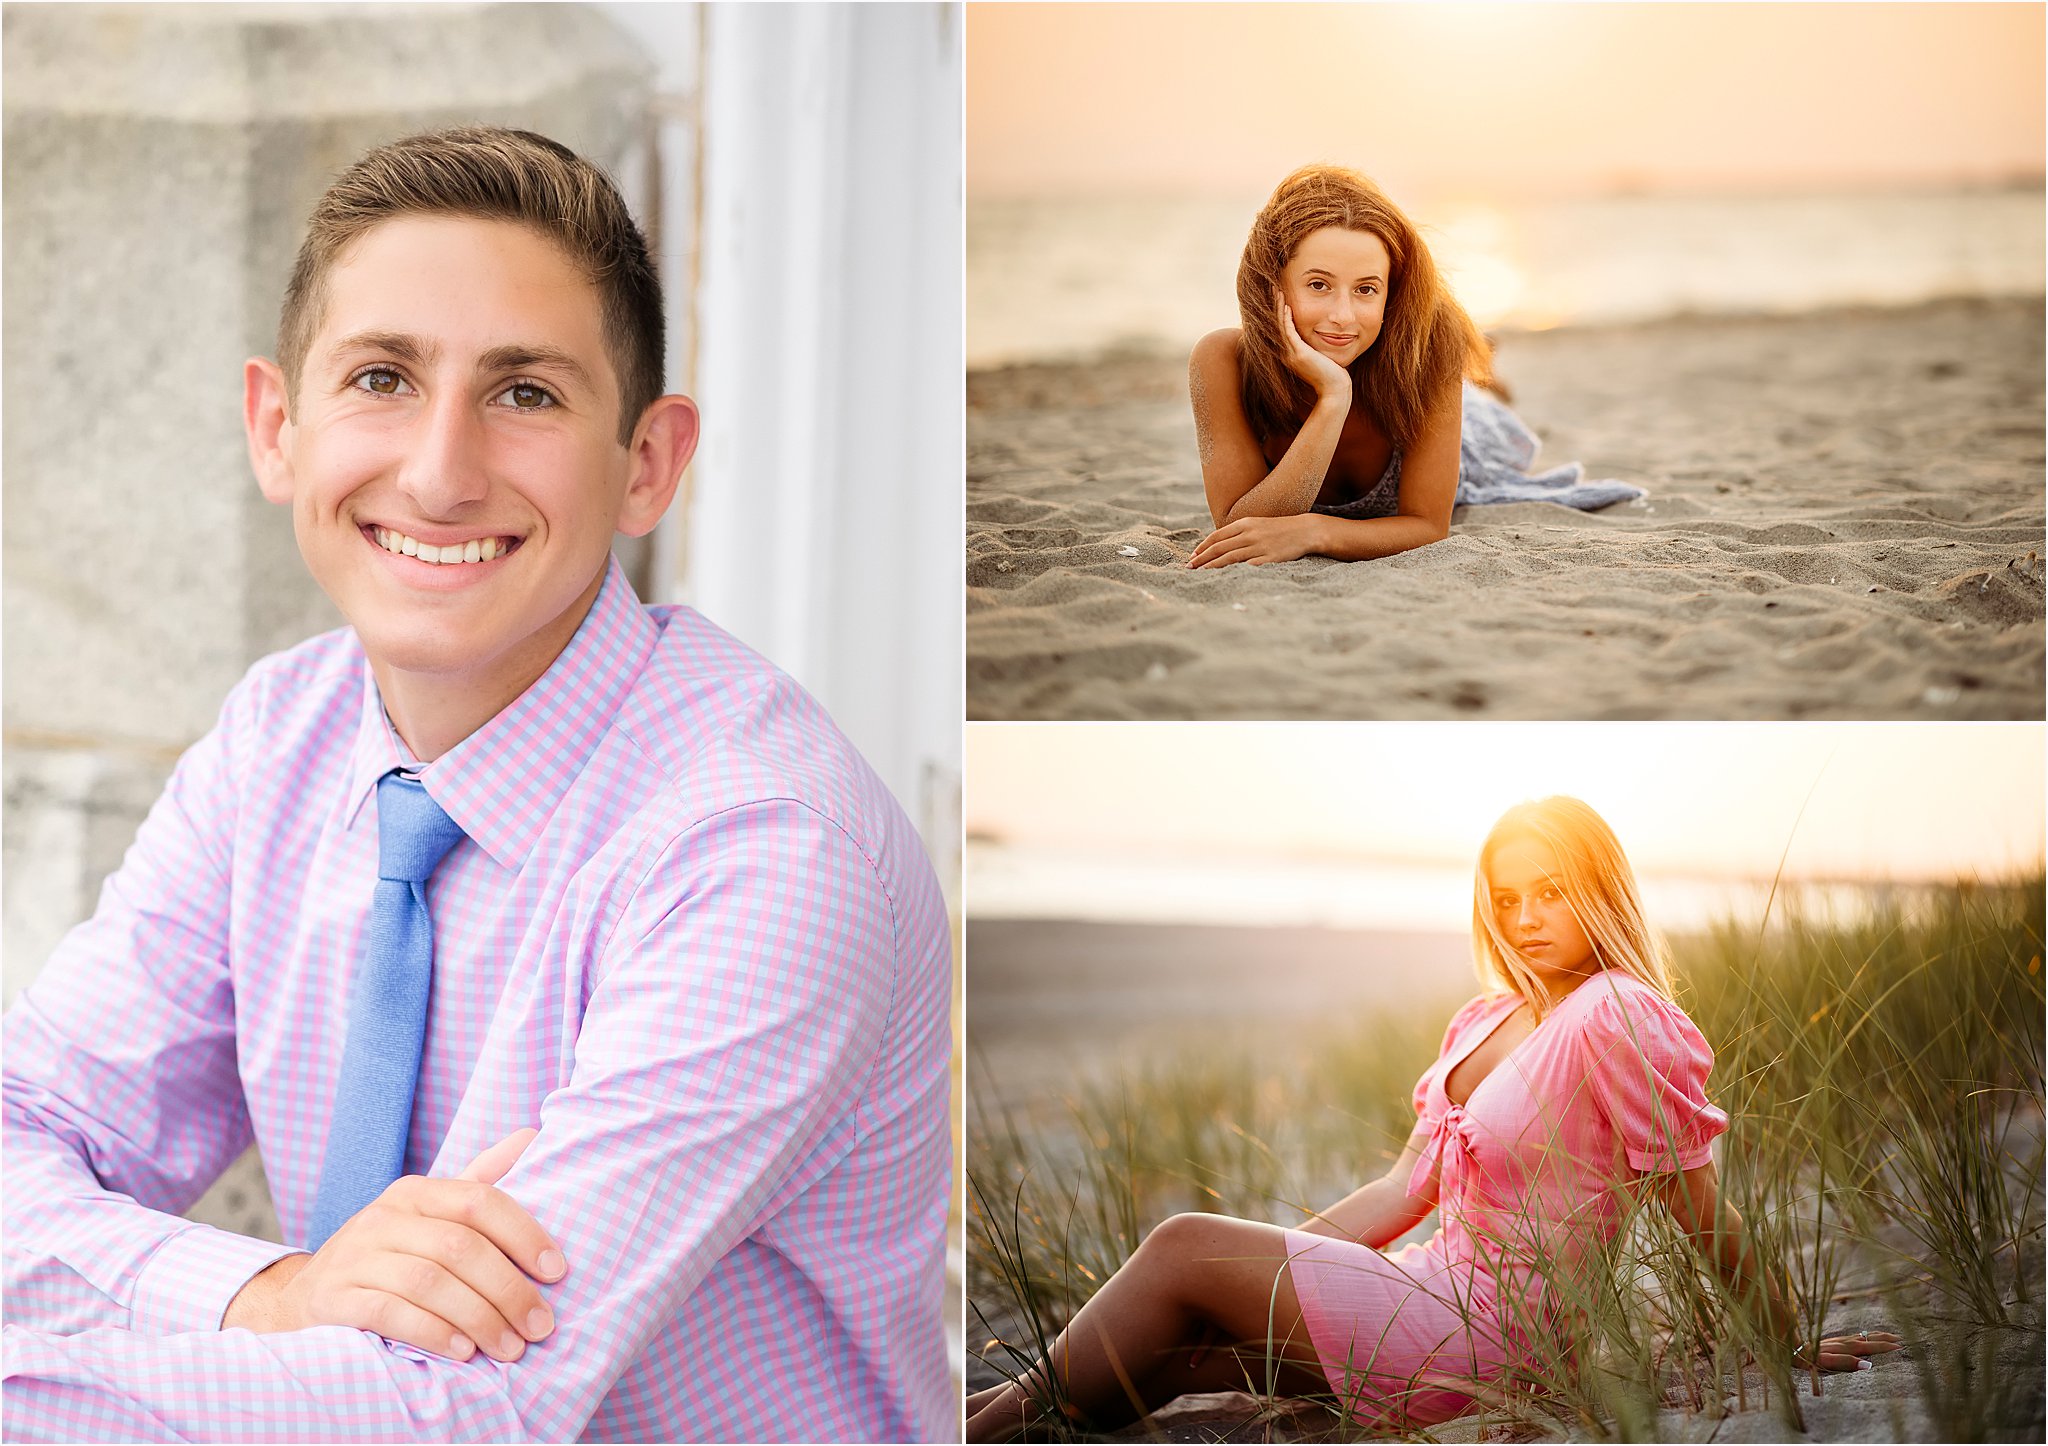 Teenagers smiling for their senior portraits, CT Senior Photographer - When should I get my senior photos done